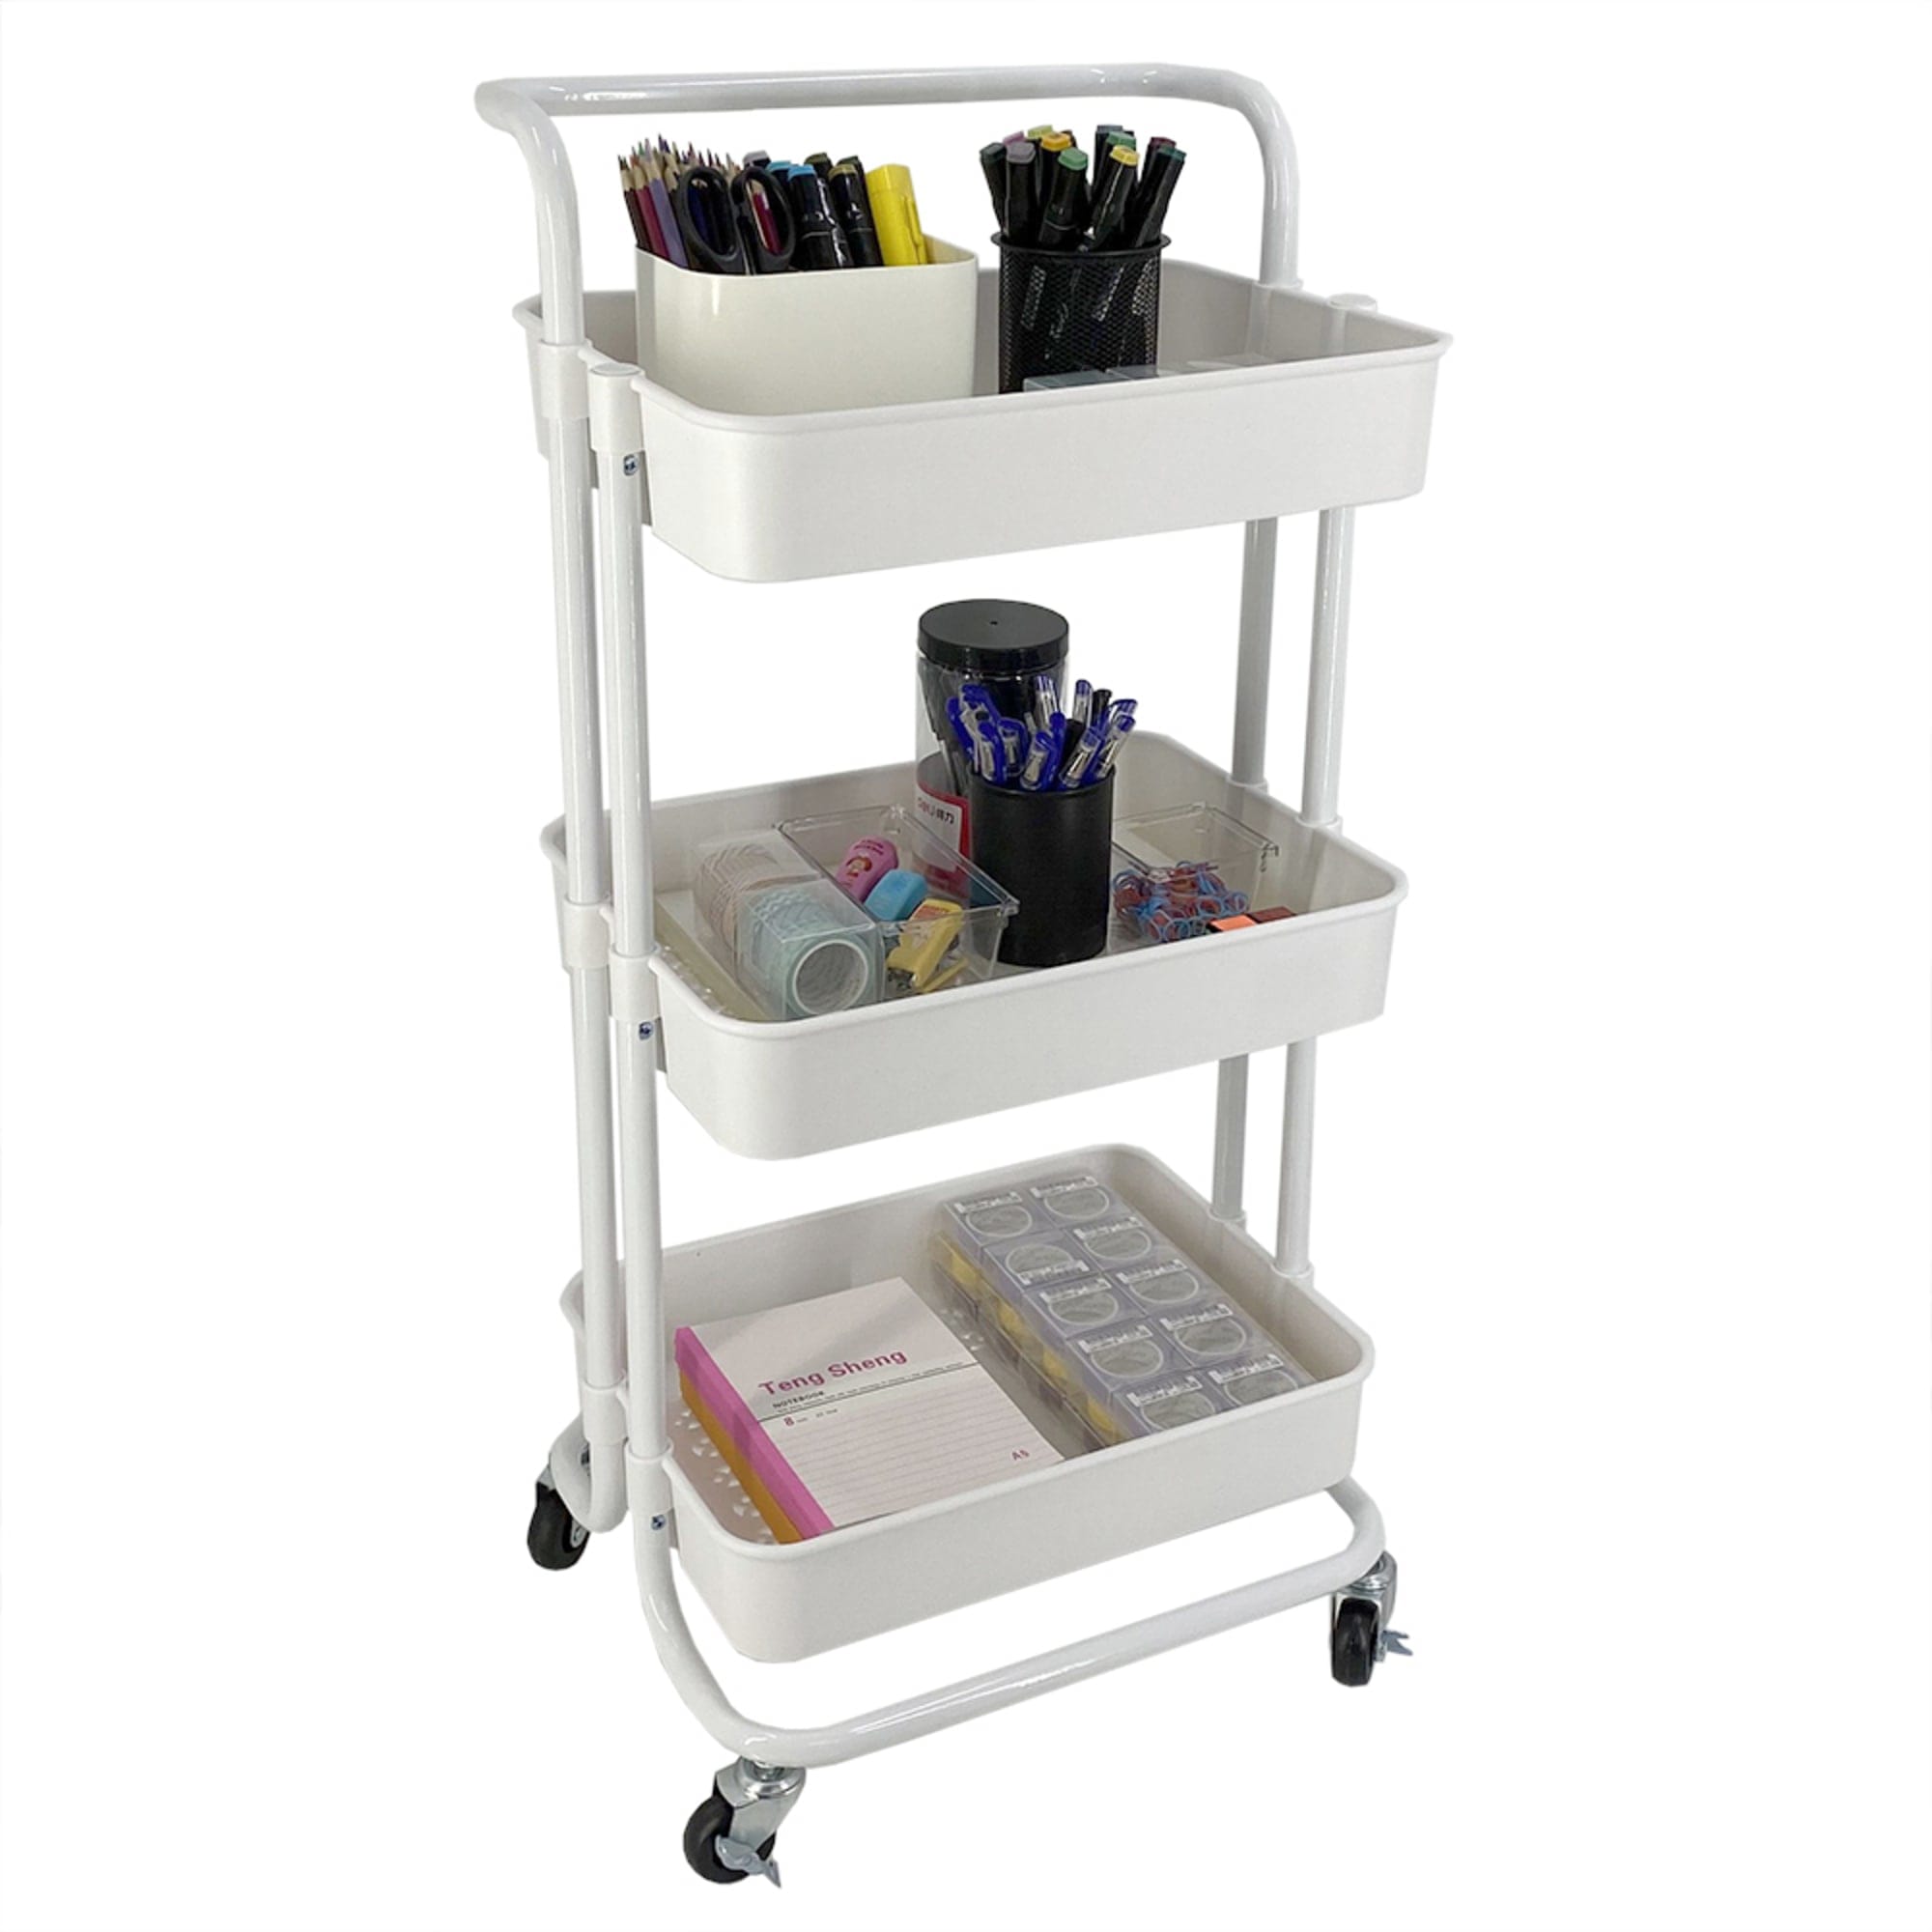 Home Basics 3 Tier Steel Rolling Utility Cart with 2 Locking Wheels, White $25.00 EACH, CASE PACK OF 3